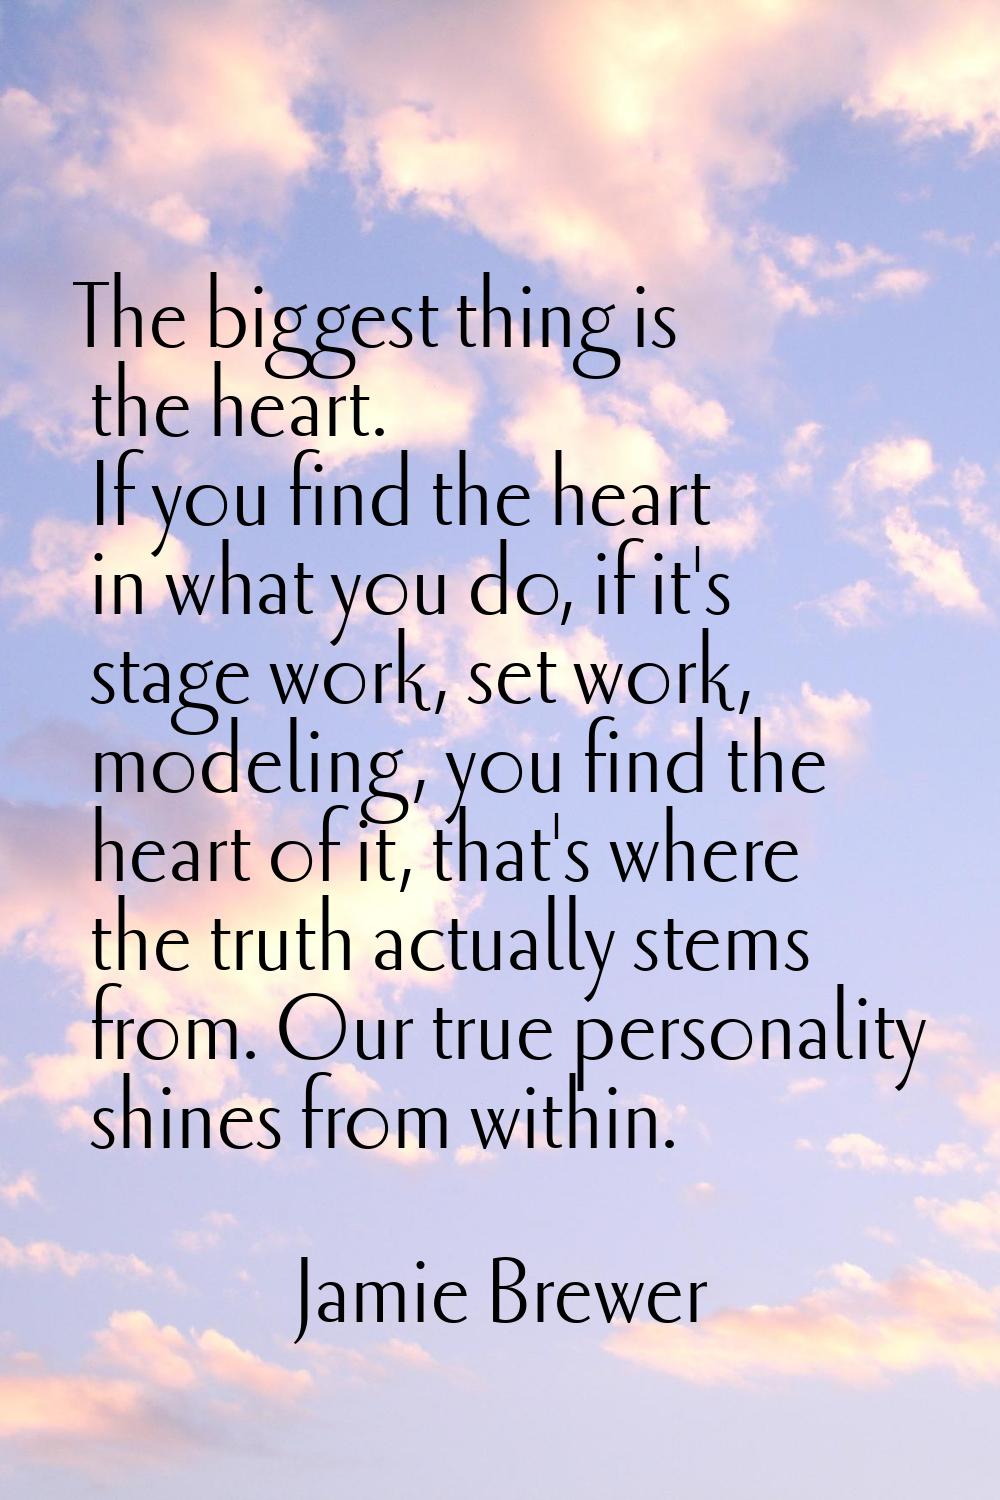 The biggest thing is the heart. If you find the heart in what you do, if it's stage work, set work,